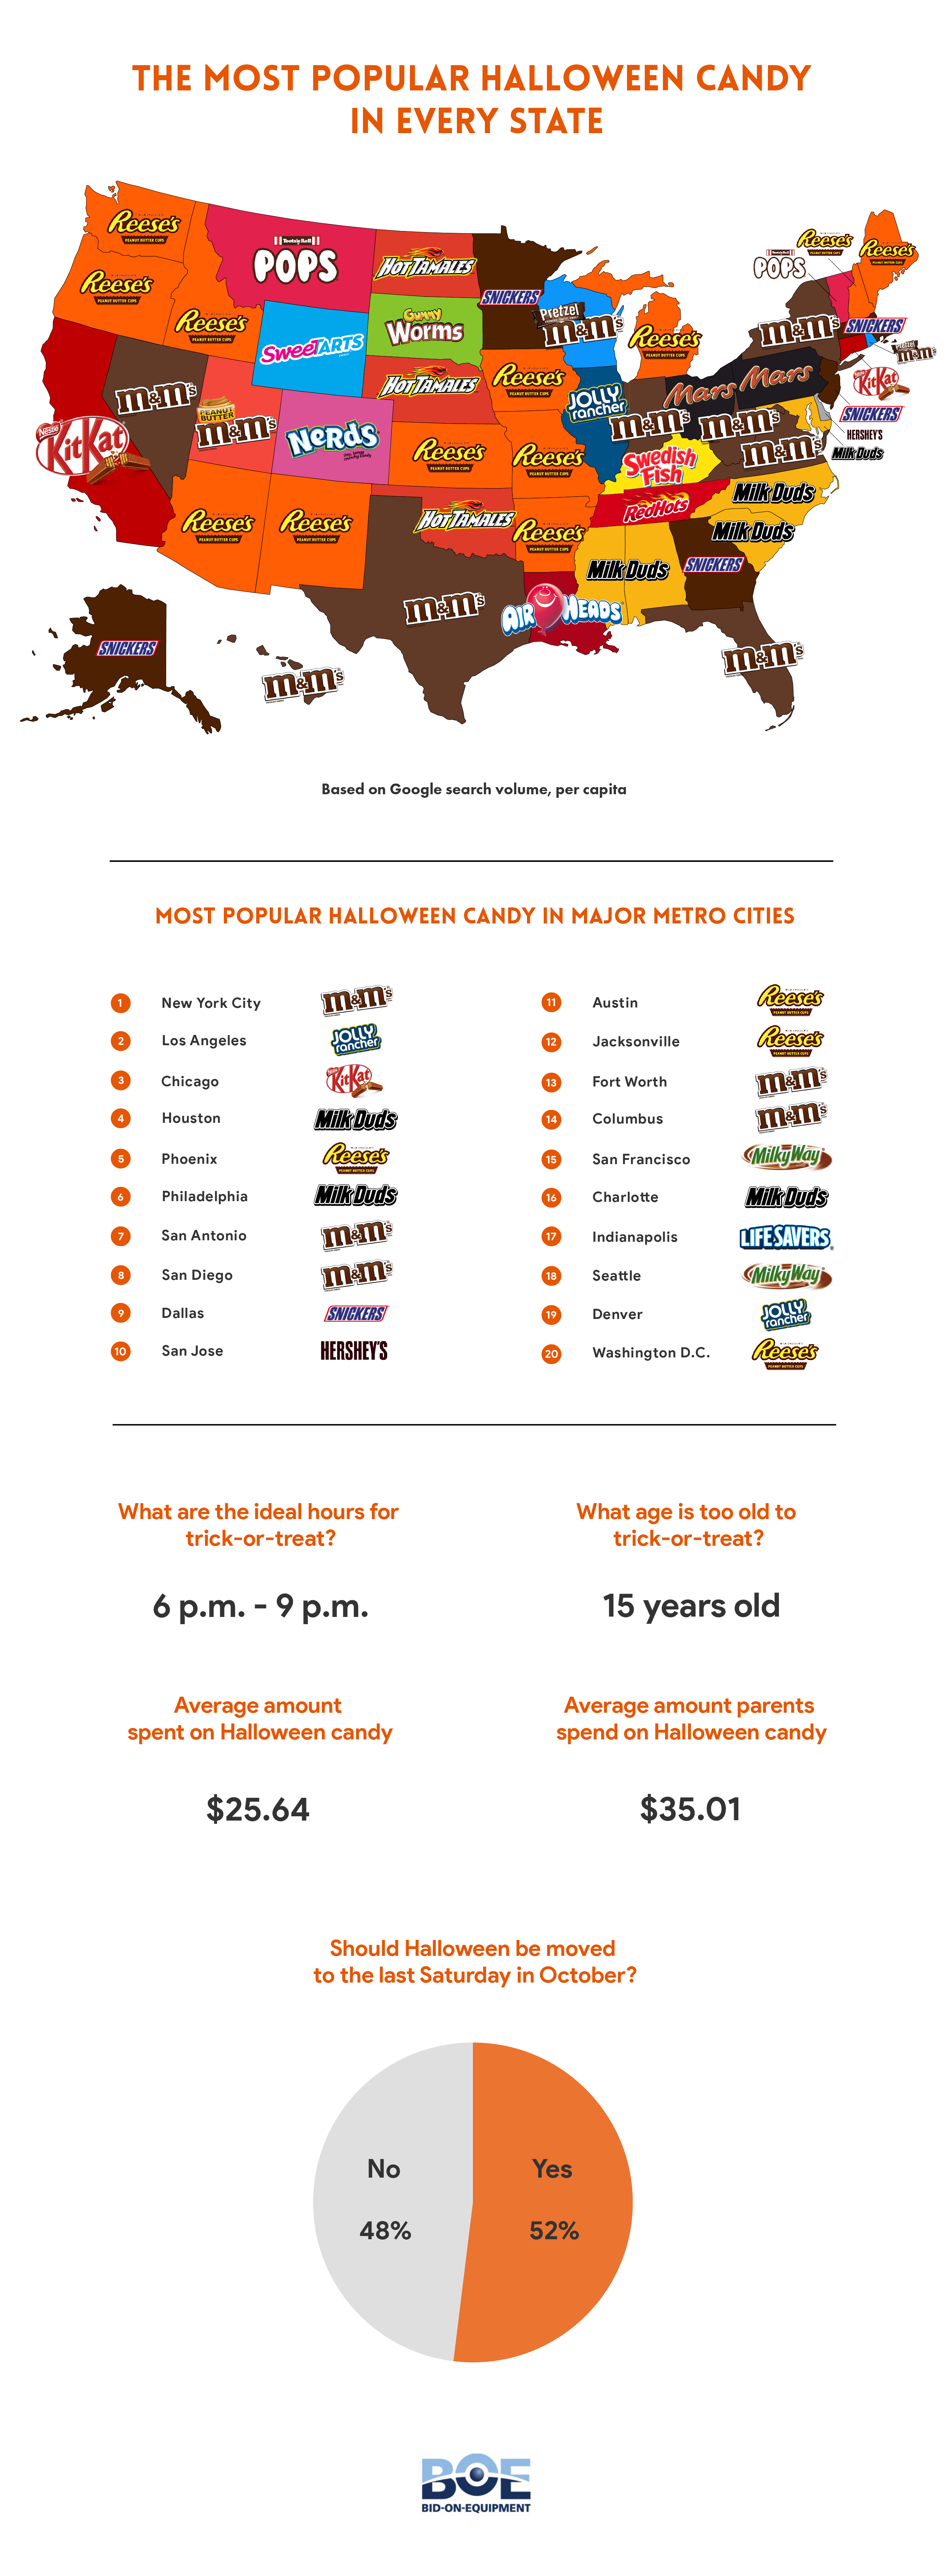 Most Popular Halloween Candy in Every State